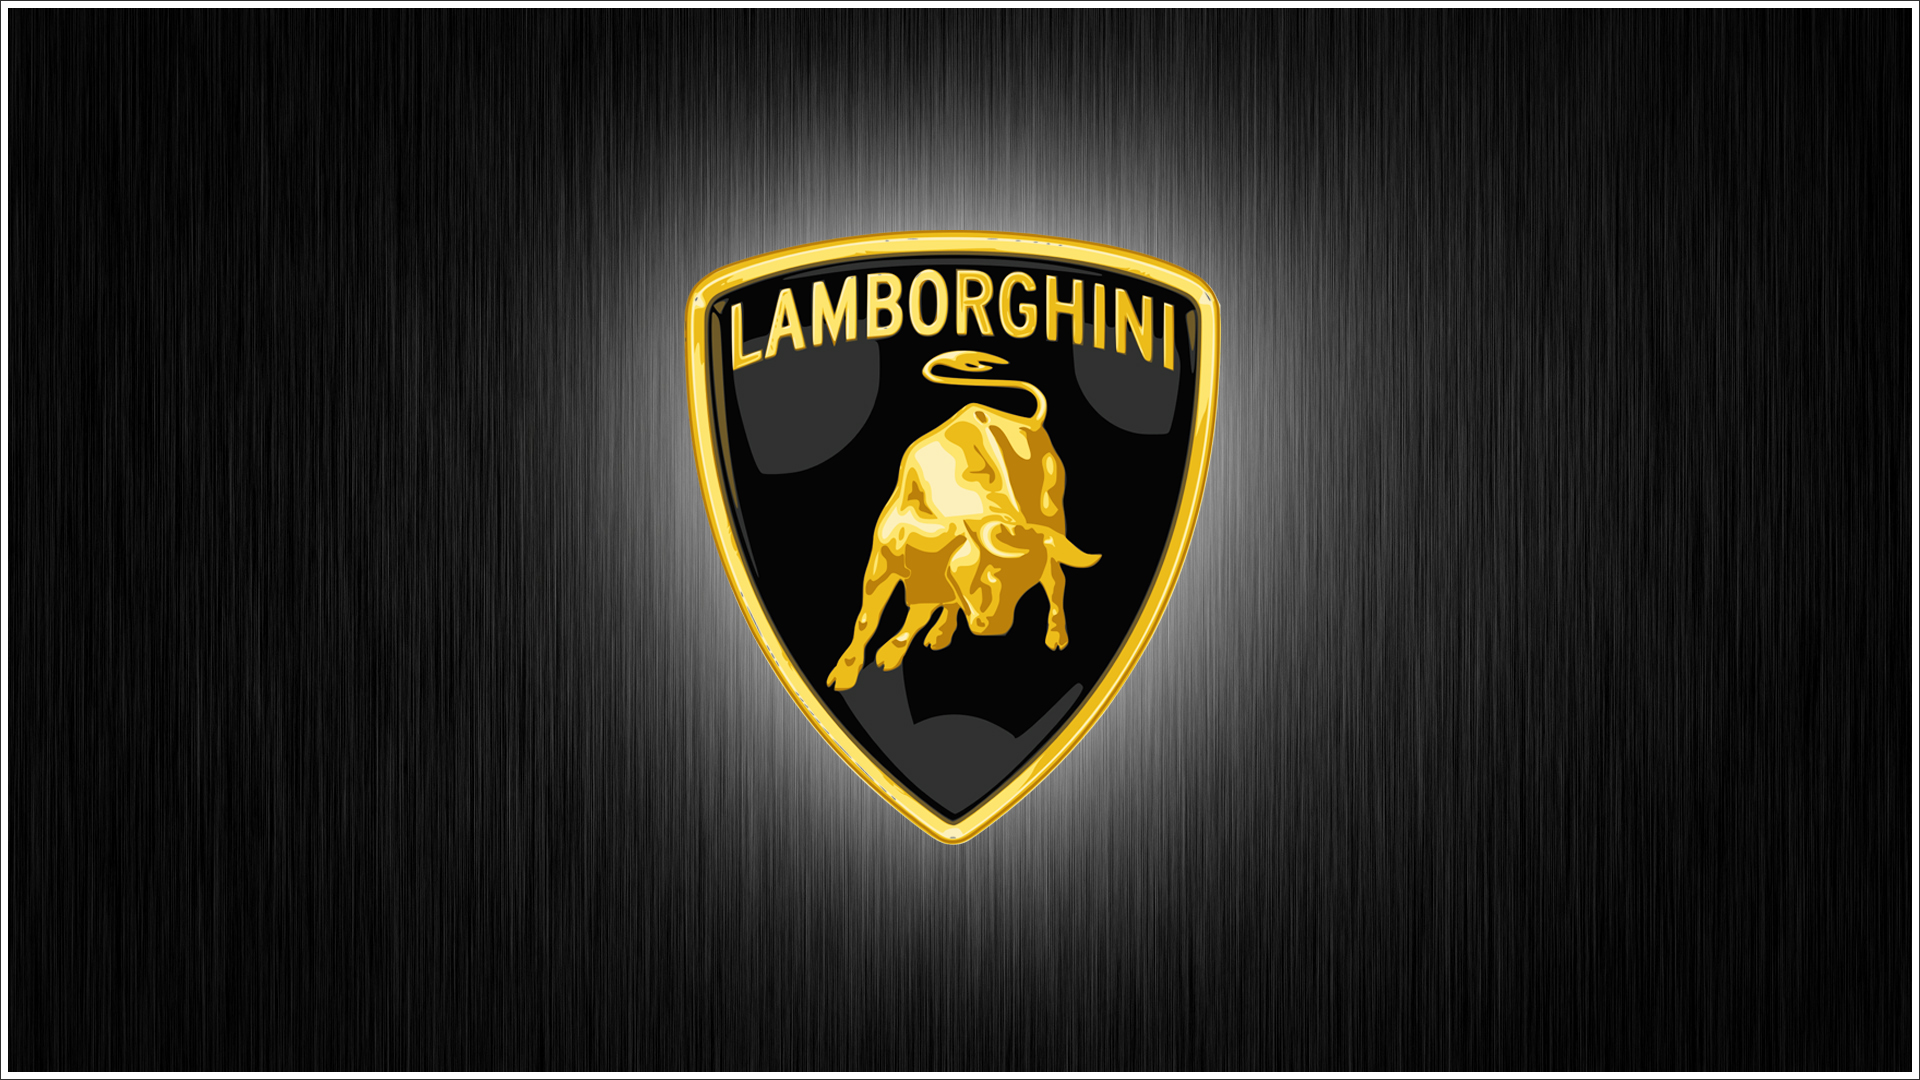 Lamborghini Logo Meaning and History, latest models | World Cars Brands